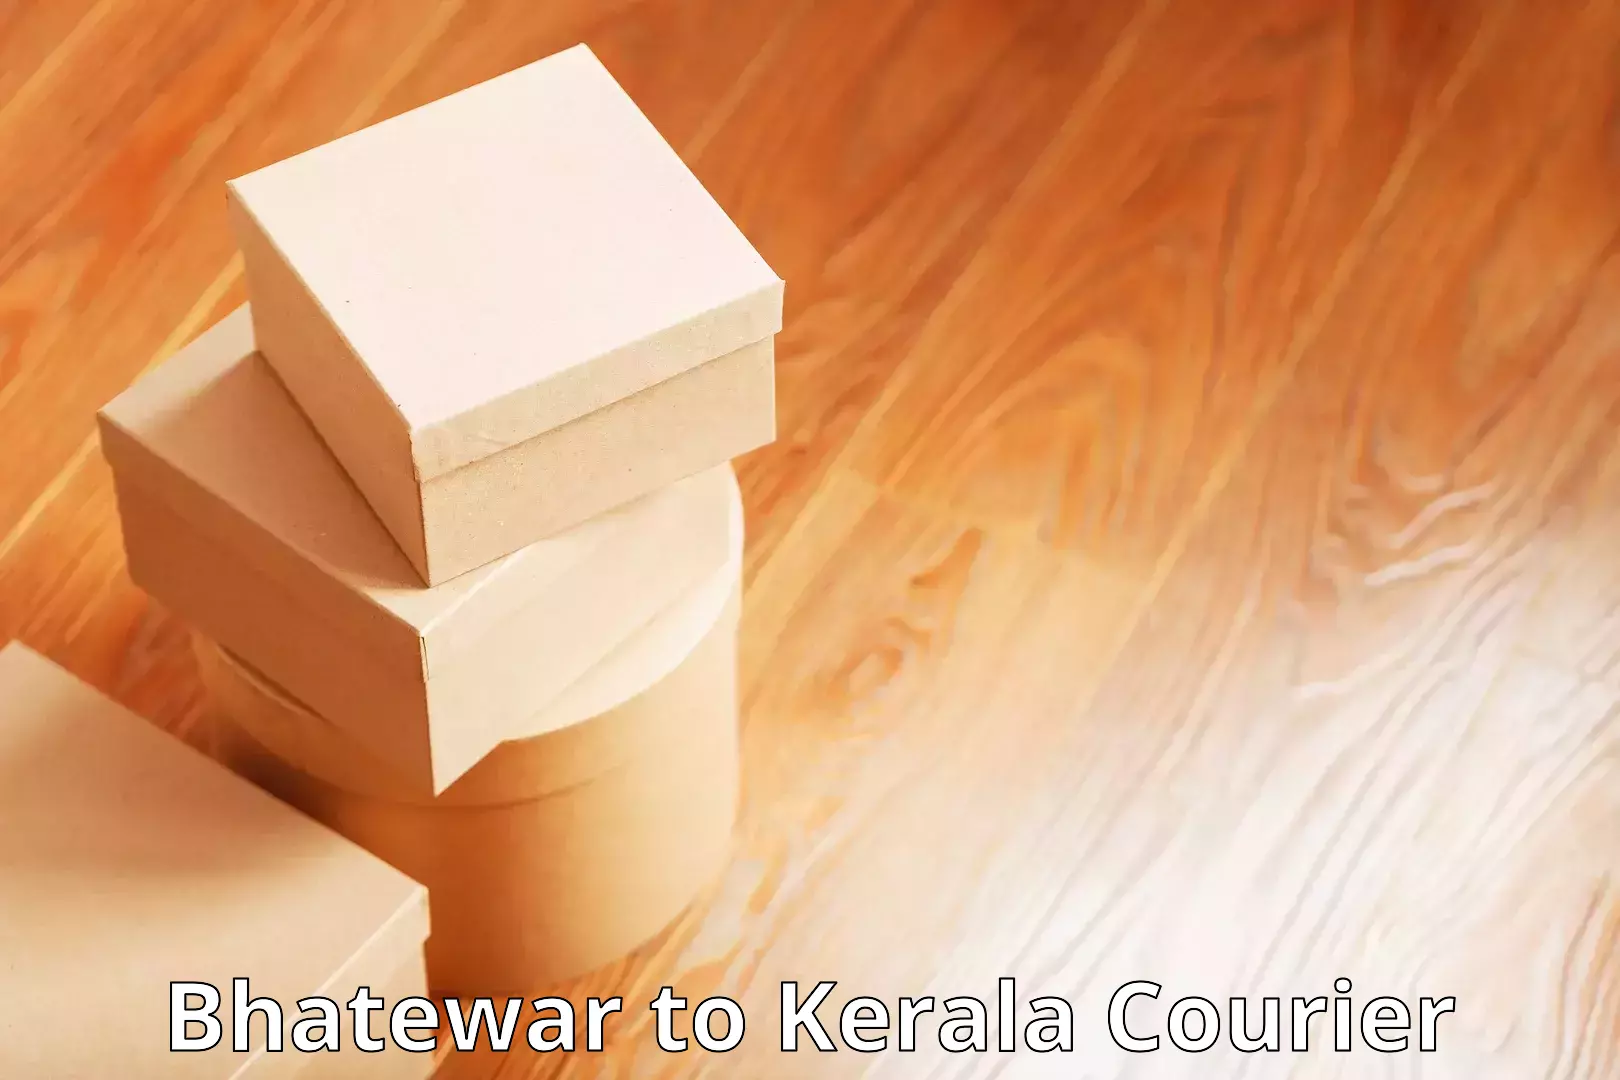 Cost-effective shipping solutions Bhatewar to Kerala